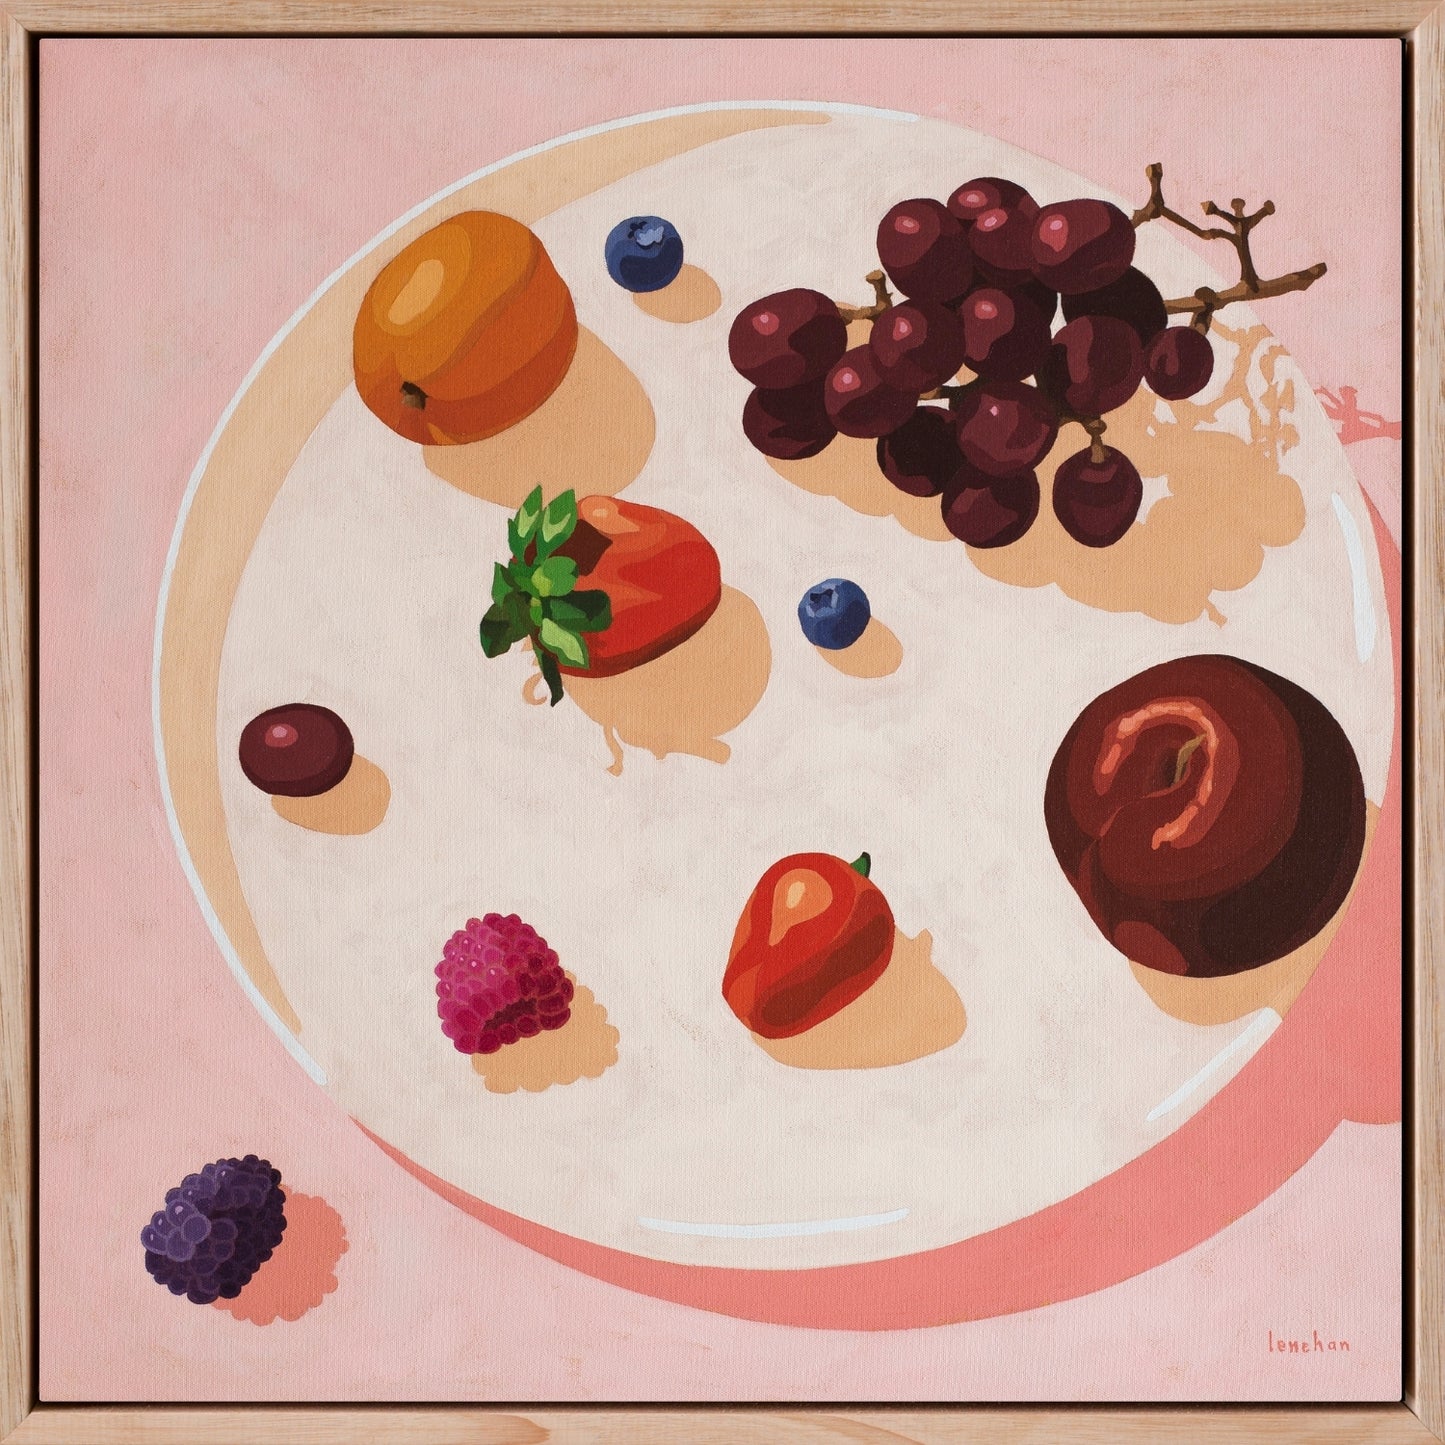 fine art print of a plate with fruits on top, plum, blueberries, blackberry, strawberry, raspberry, grapes and an apricot with a soft pink background